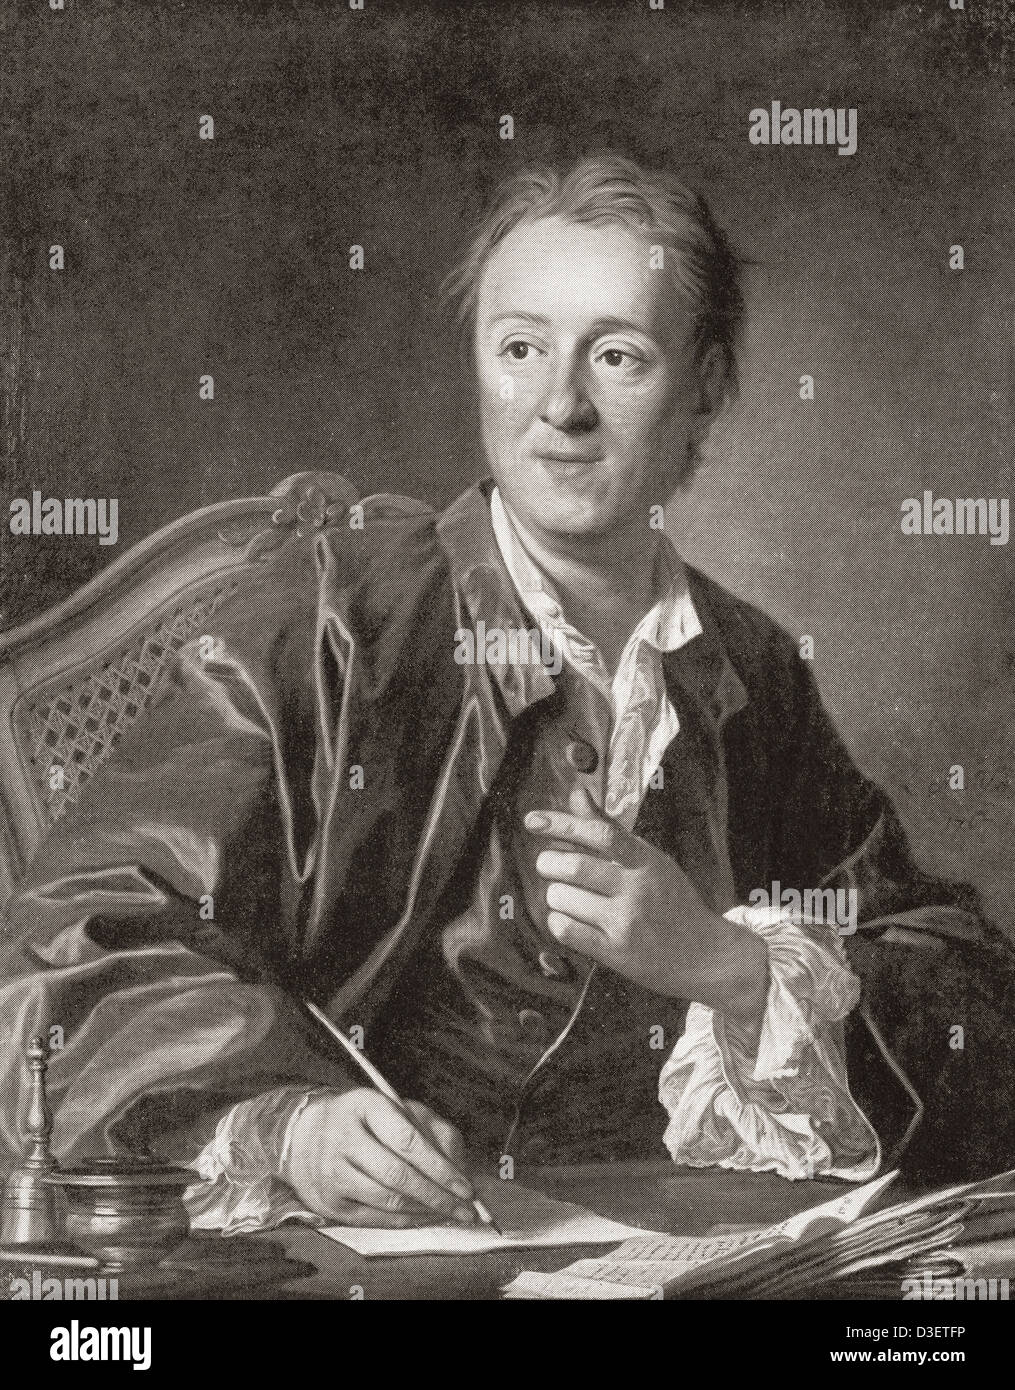 Denis Diderot, 1713 –1784. French philosopher, art critic and writer. After the painting by Louis-Michel van Loo. Stock Photo